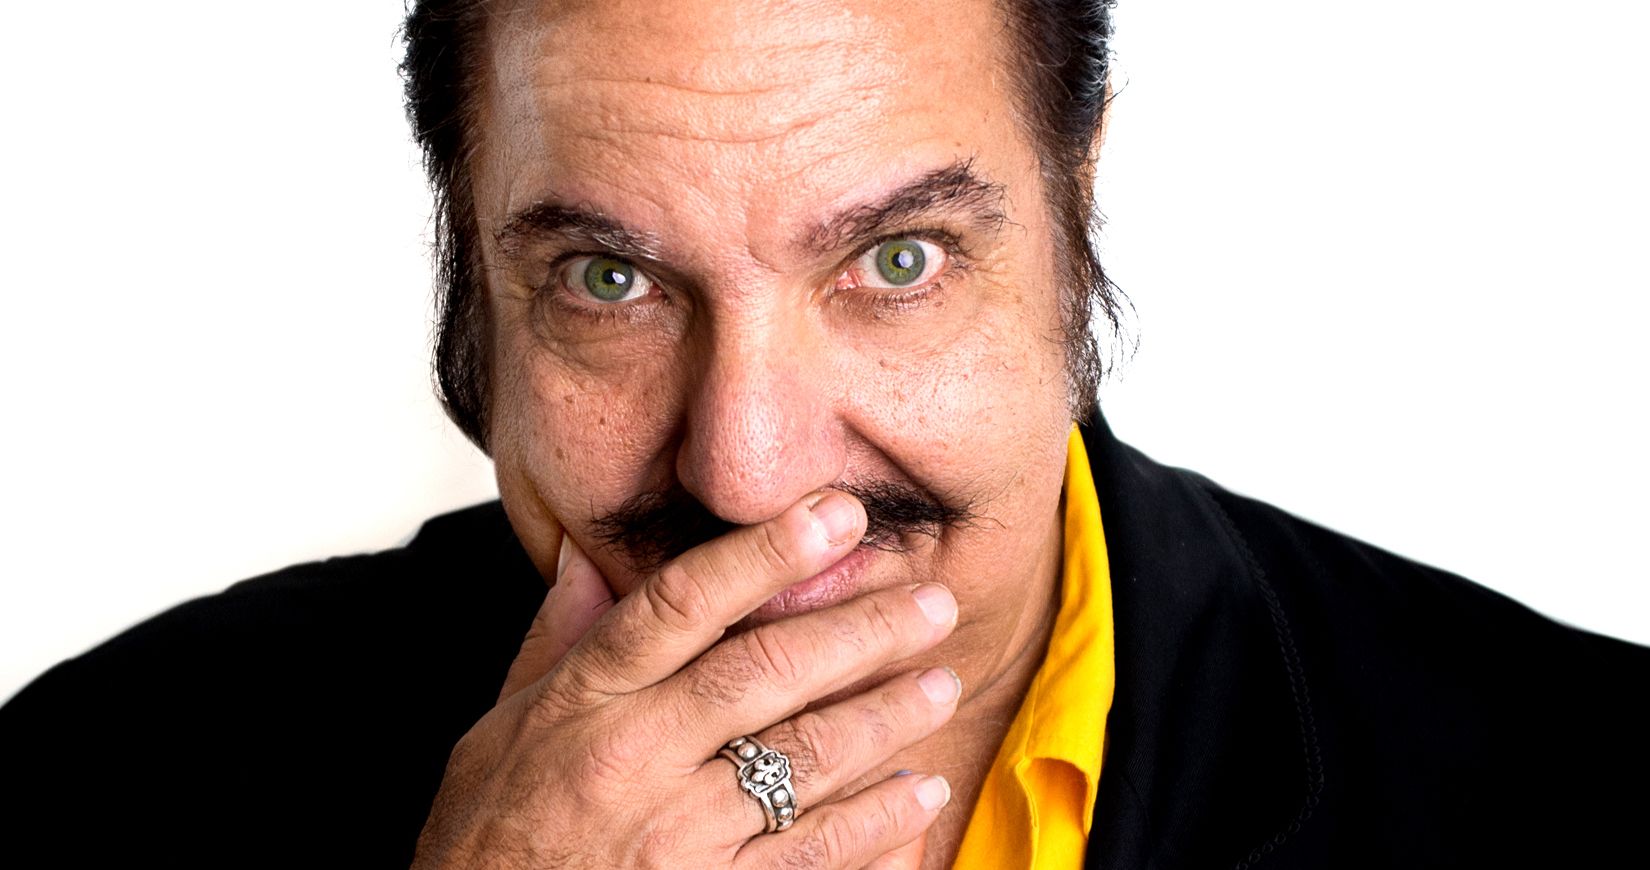 Ron Jeremy Faces 7 More Sexual Assault Charges &amp; 330 Years in Prison If Convicted